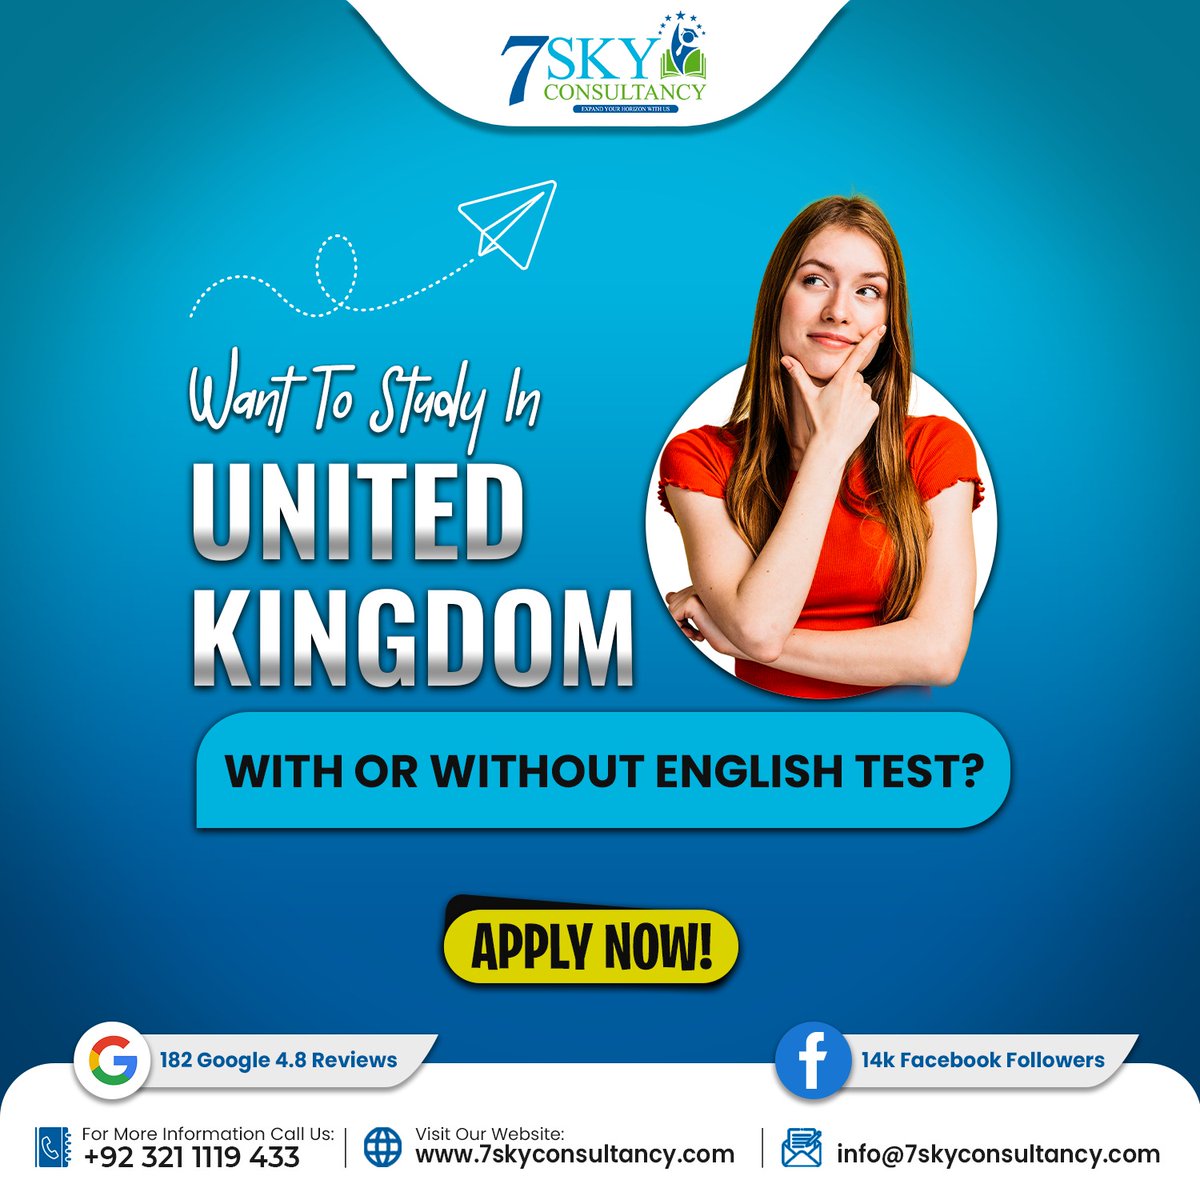 Study in the United Kingdom with and without English Test. Get Free Consultation Now. Link is here: 7skyconsultancy.com/apply-now.php #studyinuk #studyabroad #7skyconsultancy #freeconsultation